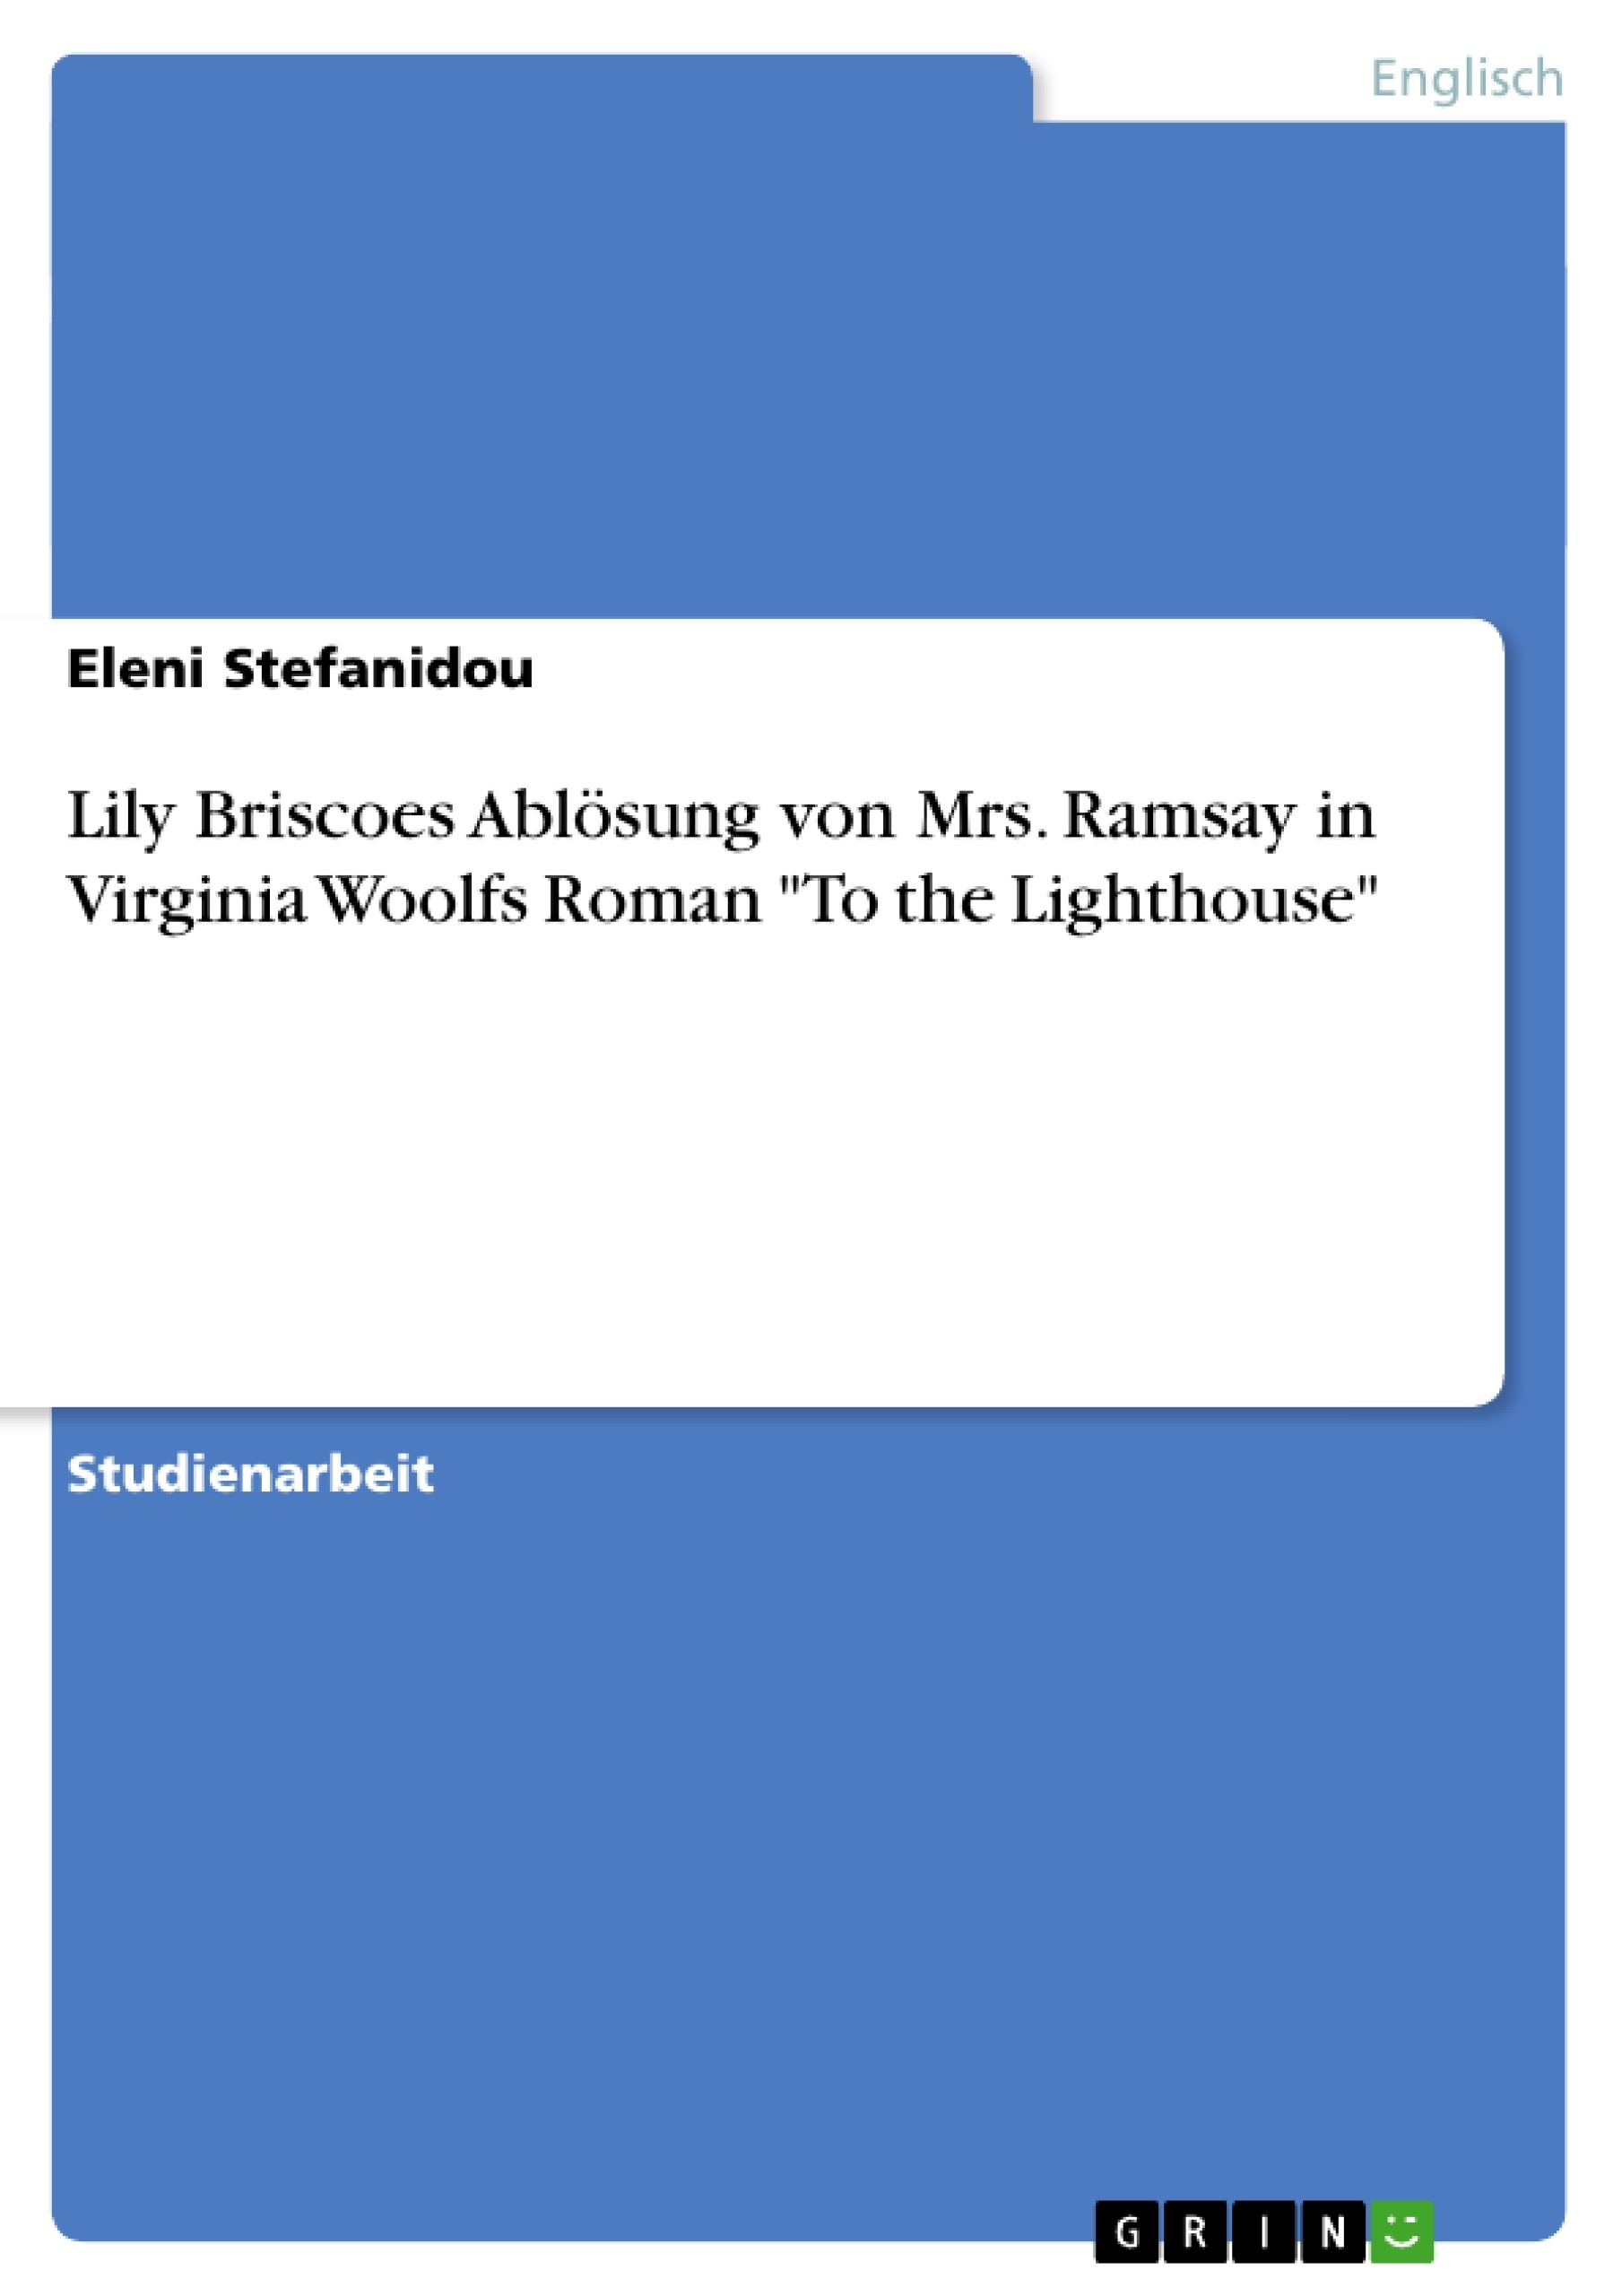 Titel: Lily Briscoes Ablösung von Mrs. Ramsay in Virginia Woolfs Roman "To the Lighthouse"